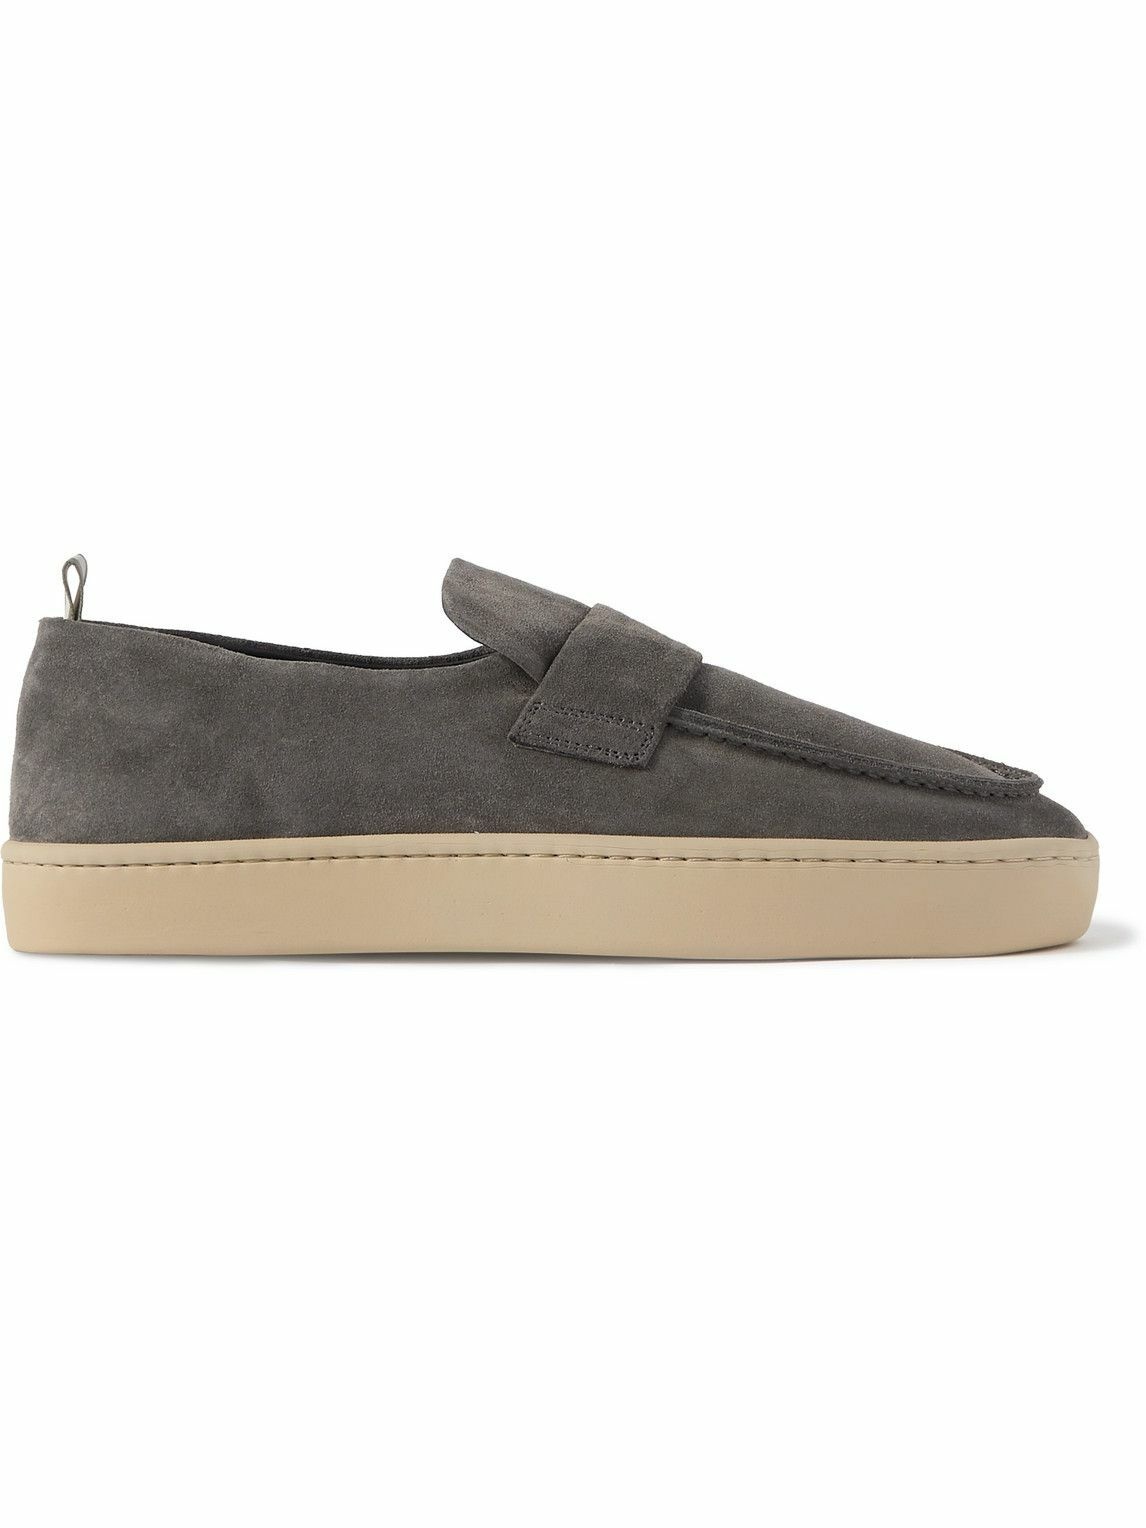 Officine Creative - Bug Suede Penny Loafers - Gray Officine Creative